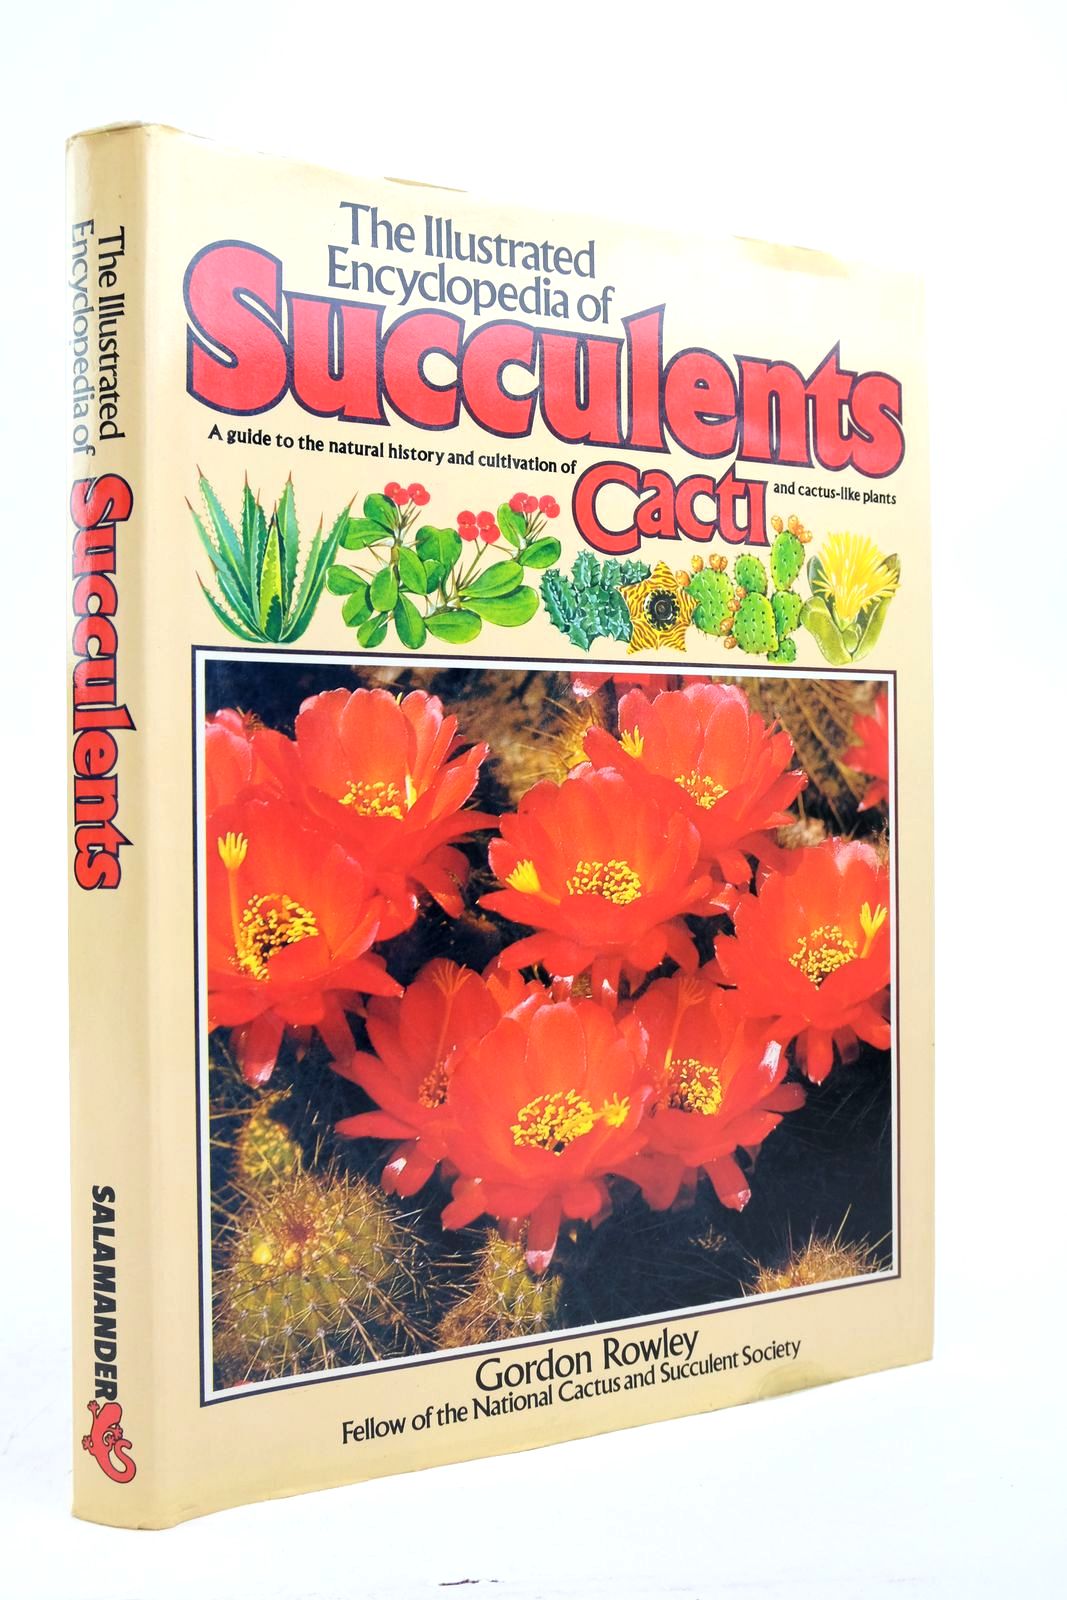 Photo of THE ILLUSTRATED ENCYCLOPEDIA OF SUCCULENTS written by Rowley, Gordon published by Salamander Books Ltd (STOCK CODE: 2139190)  for sale by Stella & Rose's Books